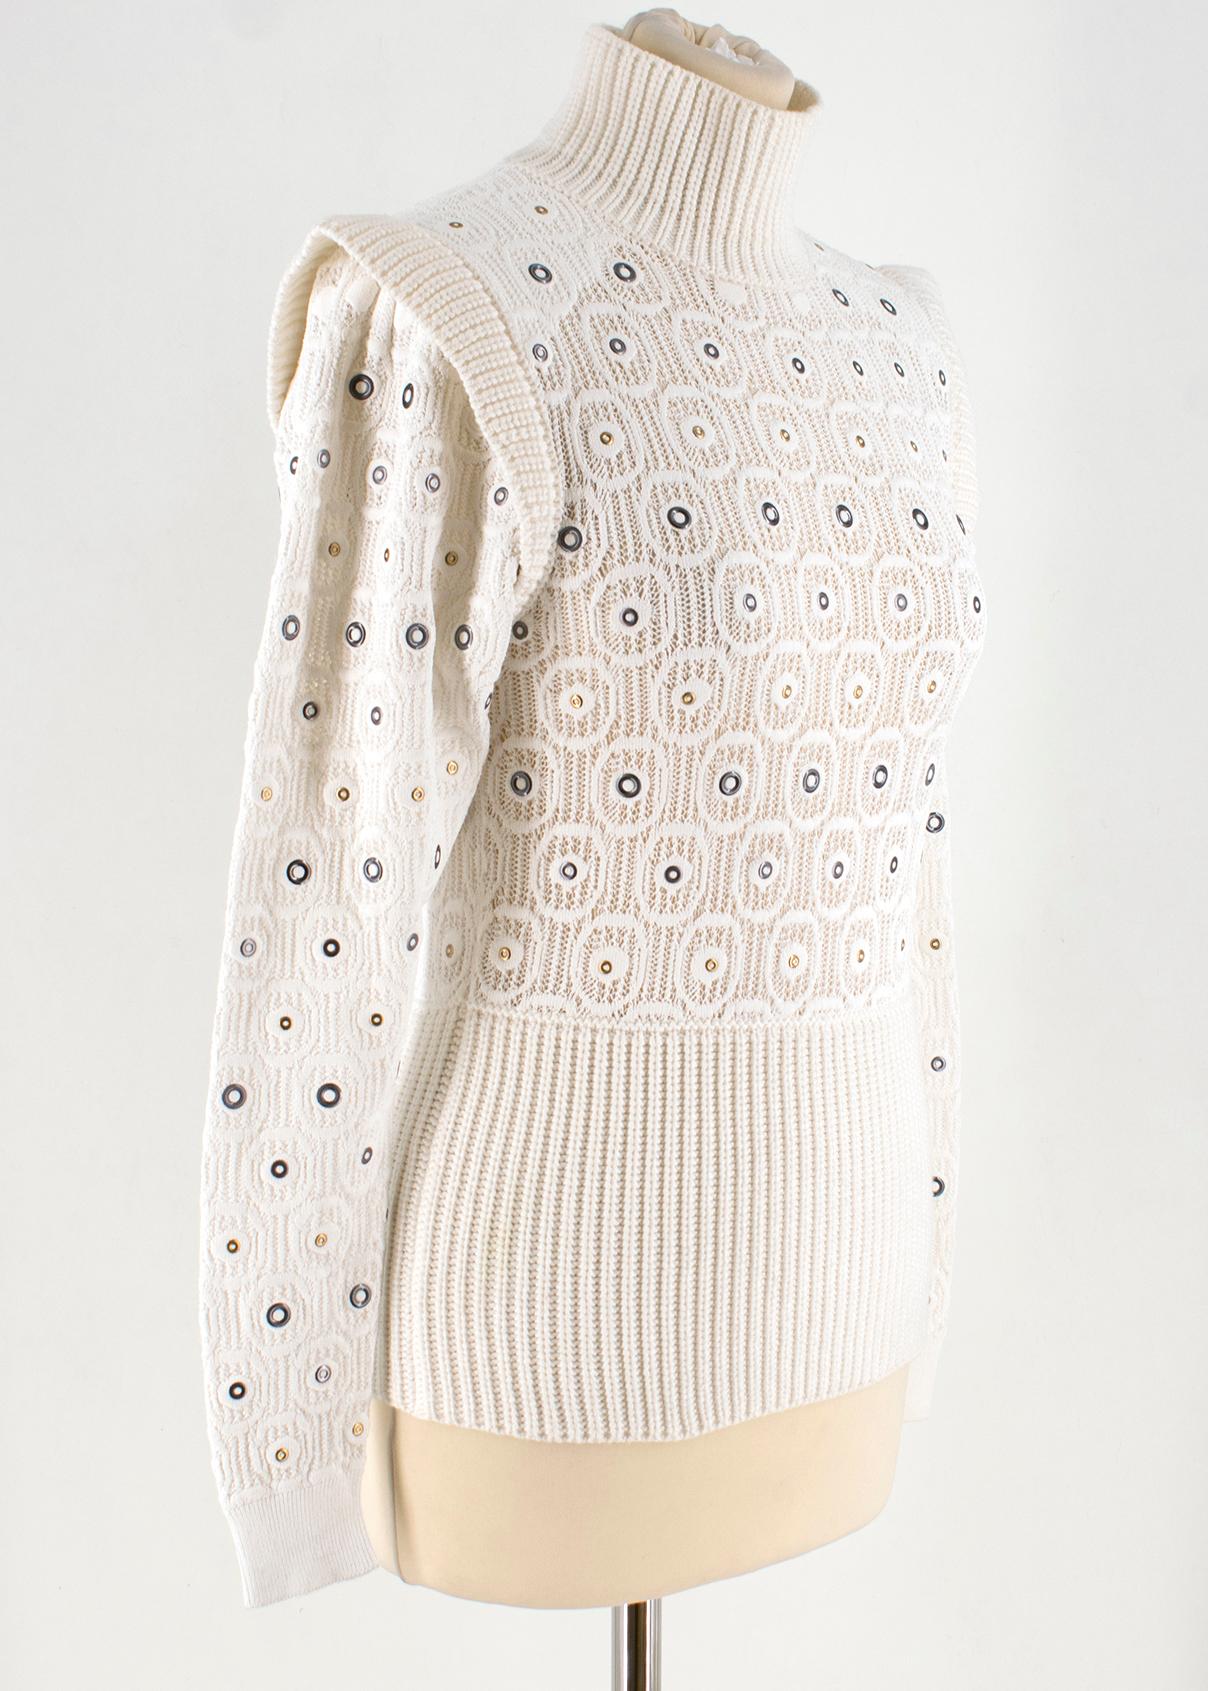 Chloe eyelet-embellished crochet-knit sweater 

- White, crochet knit 
- High neck, long sleeves 
- Ribbed-knit neck, cuffs and hem 
- Gold-tone and gunmetal eyelet embellished 
- Slip on 

Please note, these items are pre-owned and may show some